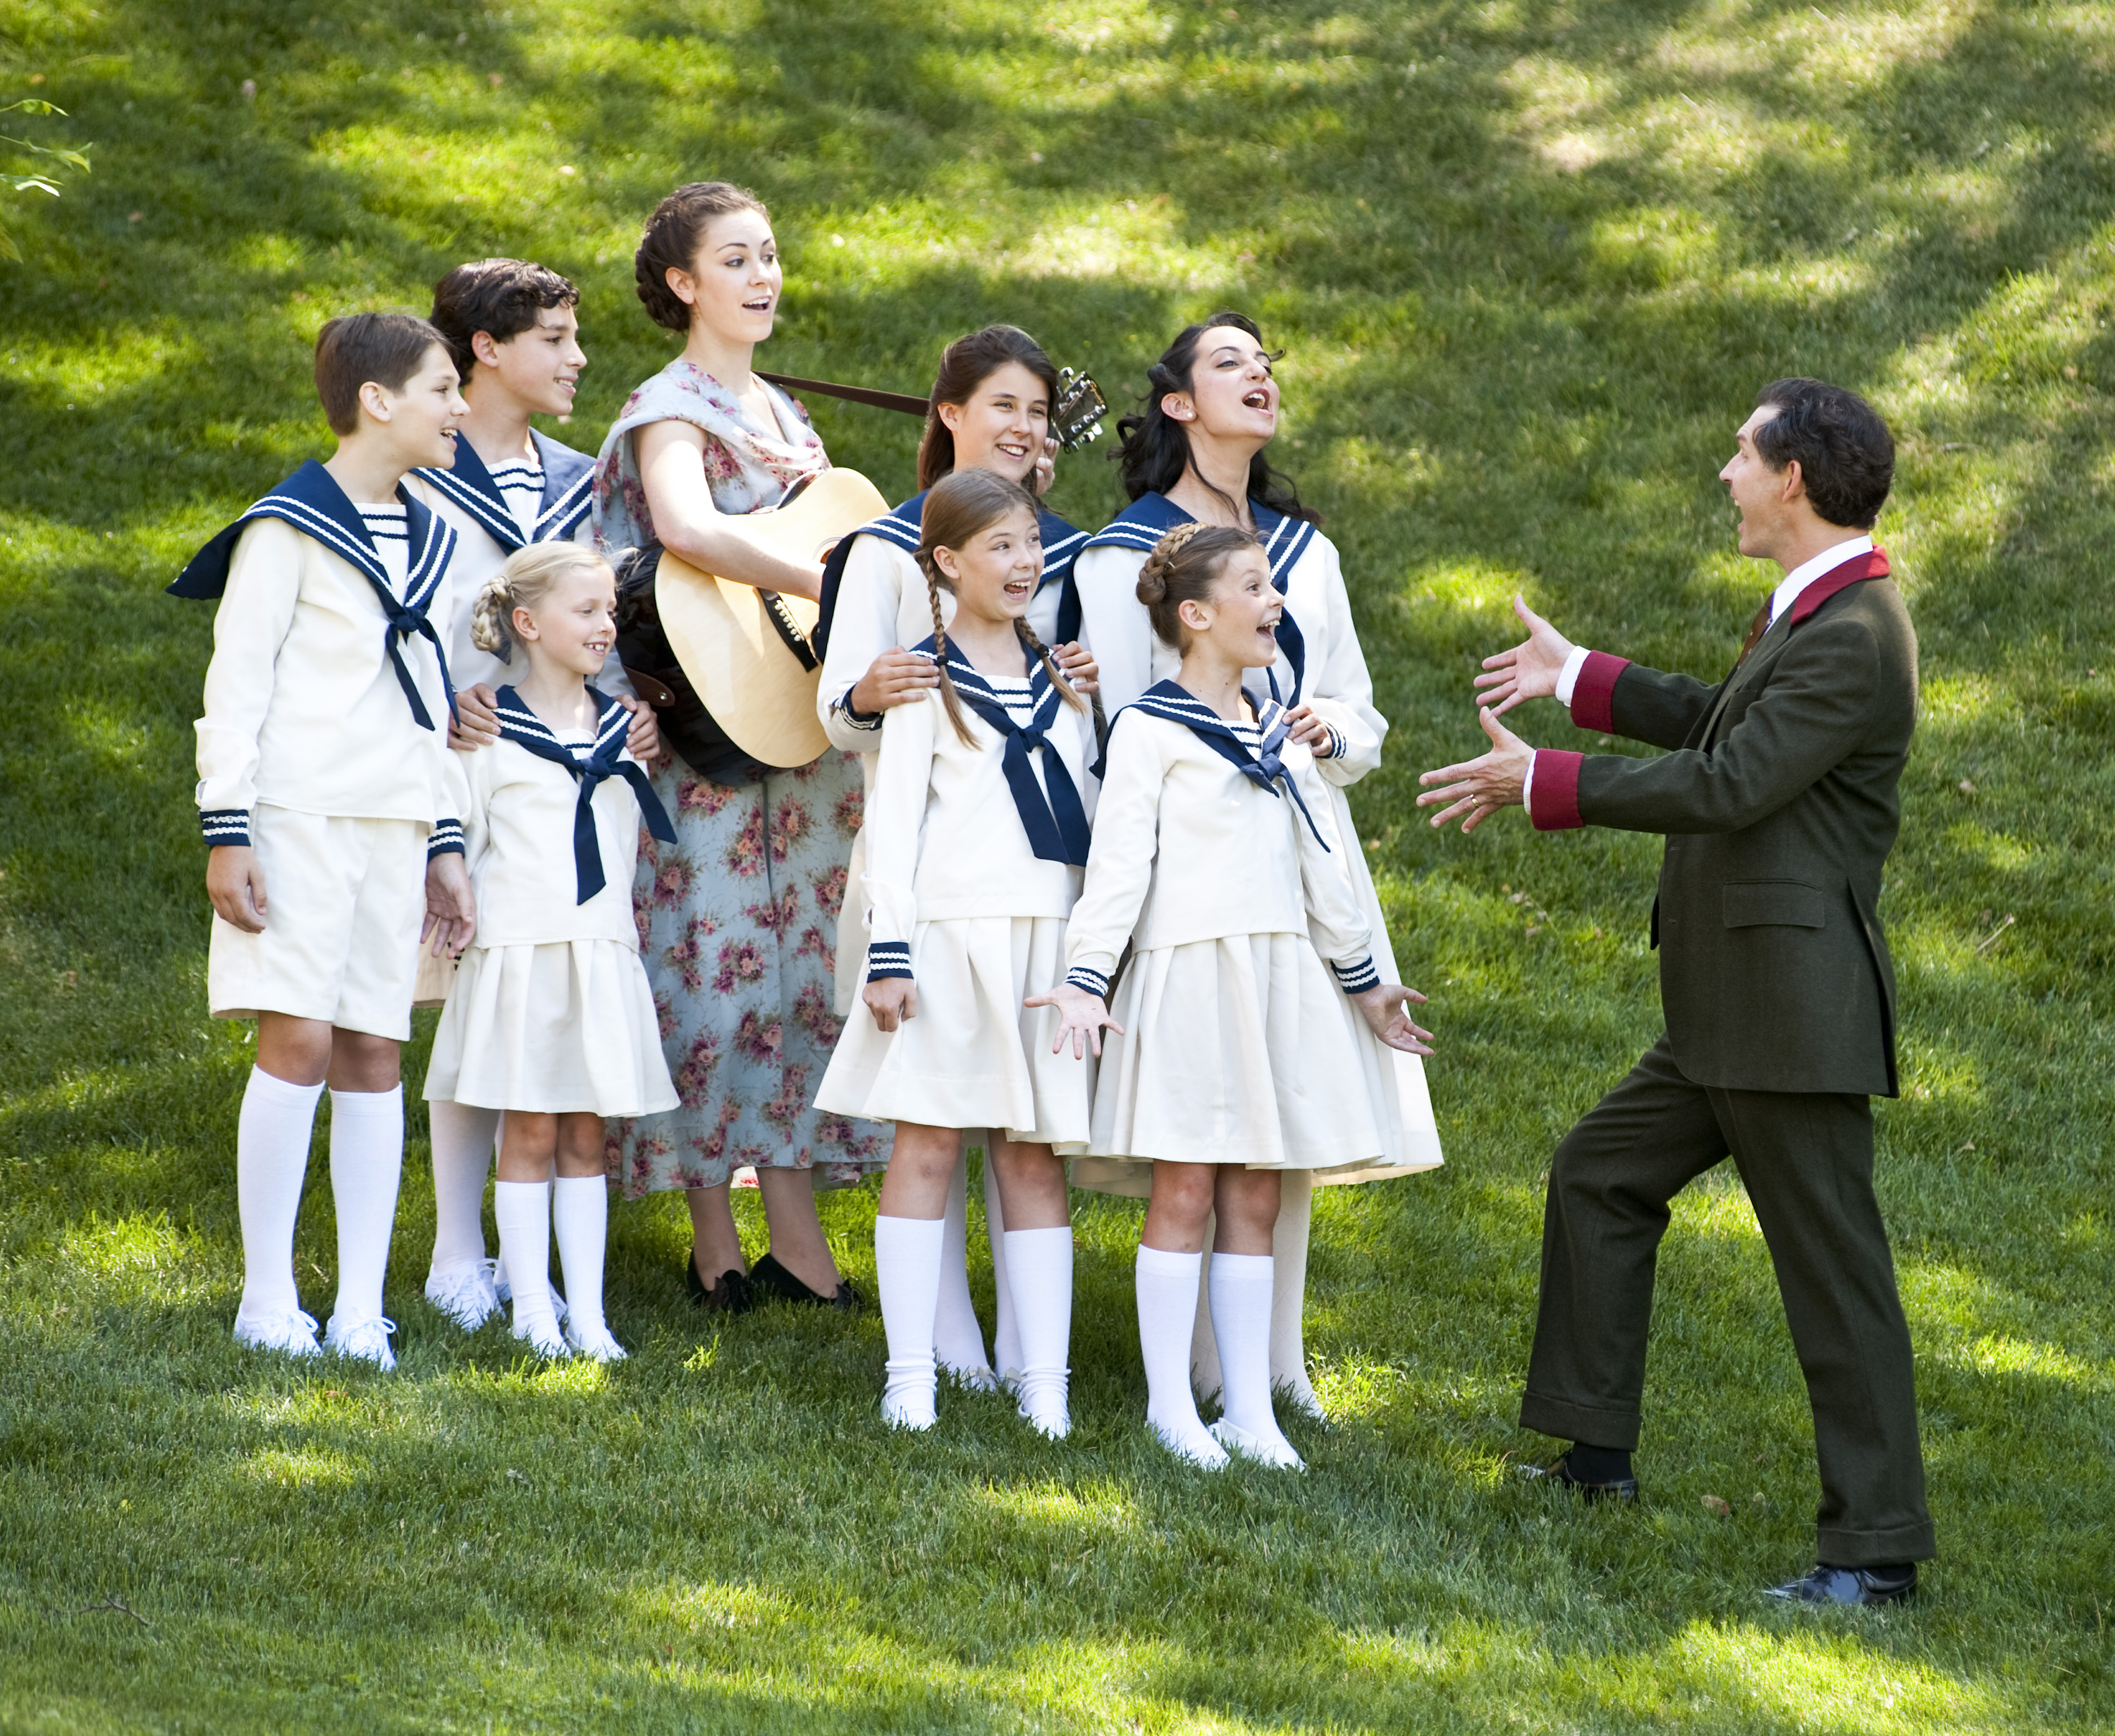 Actors on a green hill as they play sing during a rehearsal for the sound of music